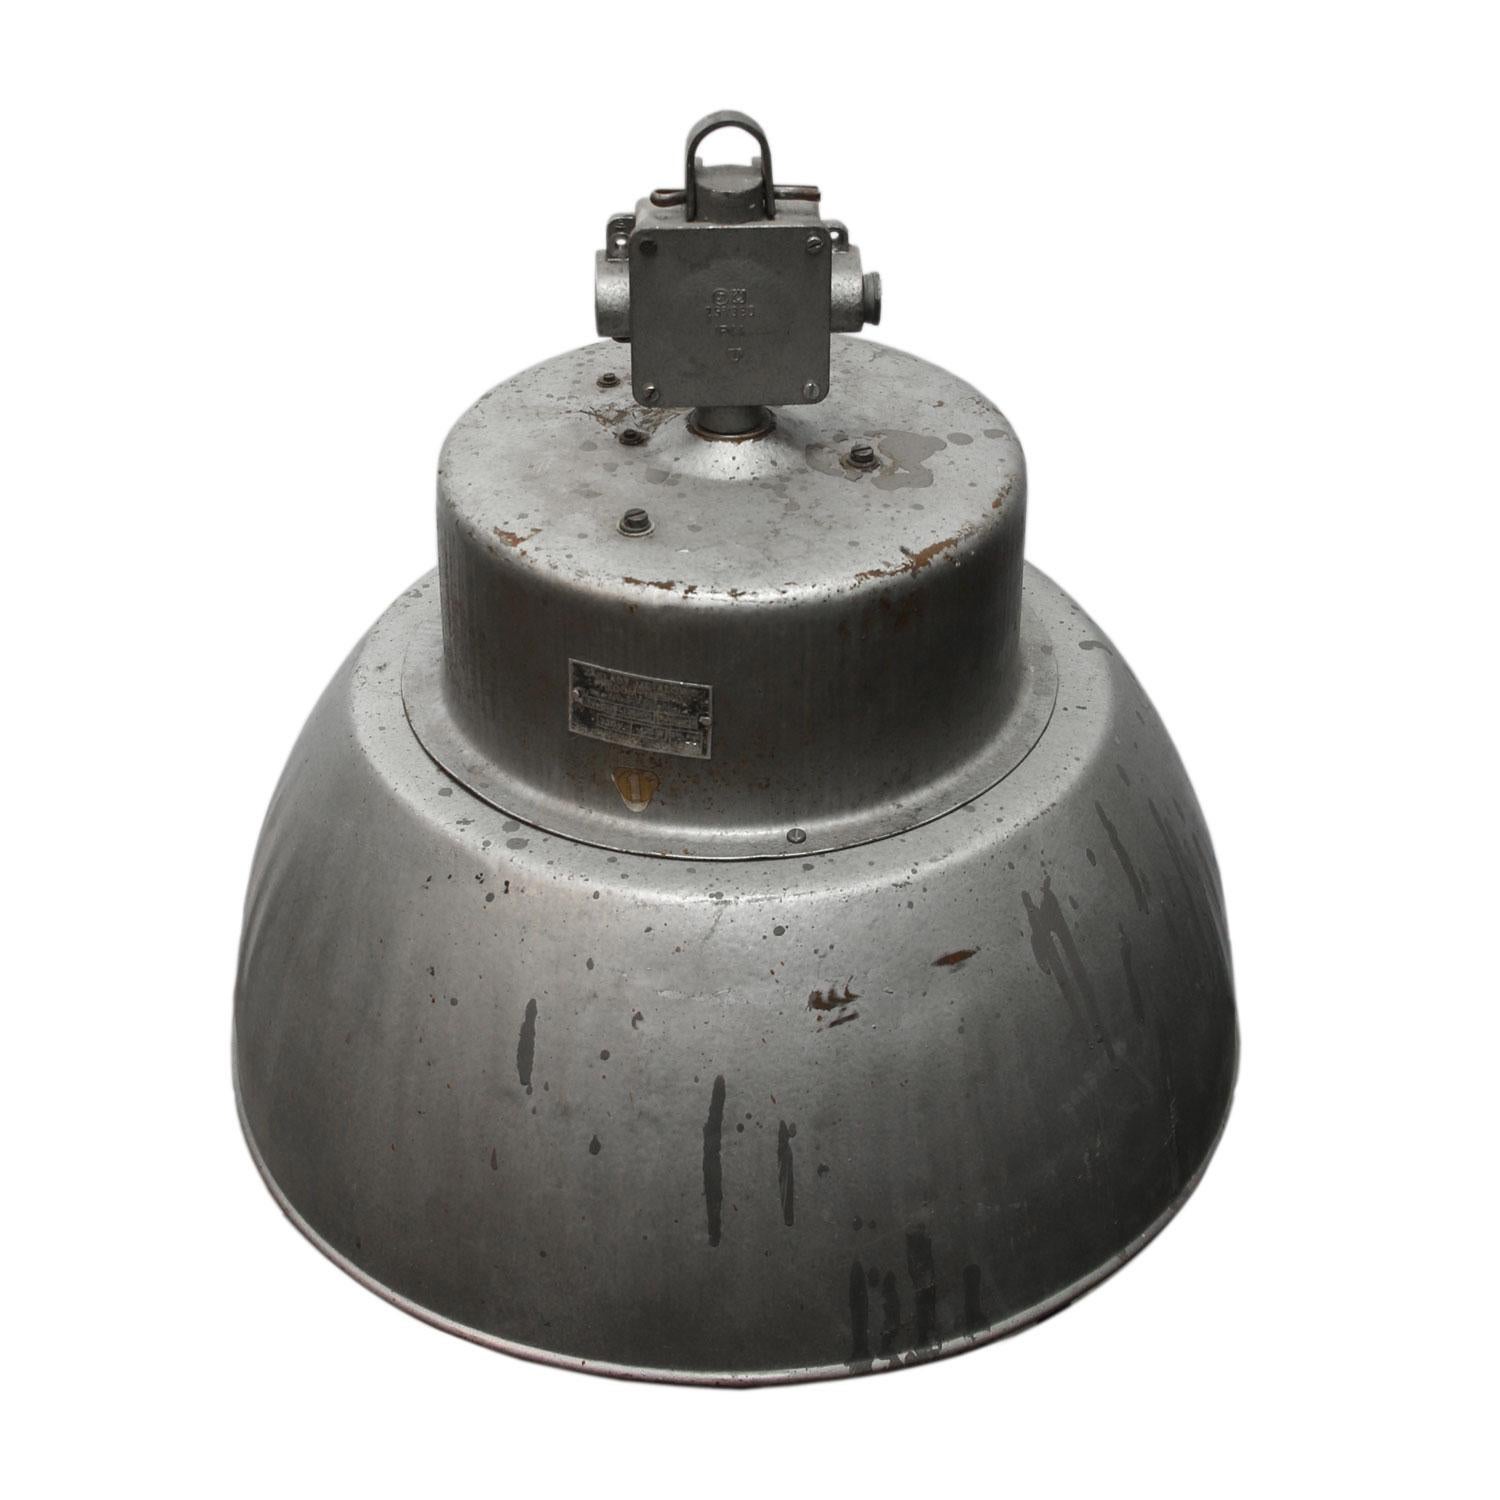 Industrial hanging light
Hammer blow grey aluminium

Weight: 4.00 kg / 8.8 lb

Priced per individual item. All lamps have been made suitable by international standards for incandescent light bulbs, energy-efficient and LED bulbs. E26/E27 bulb